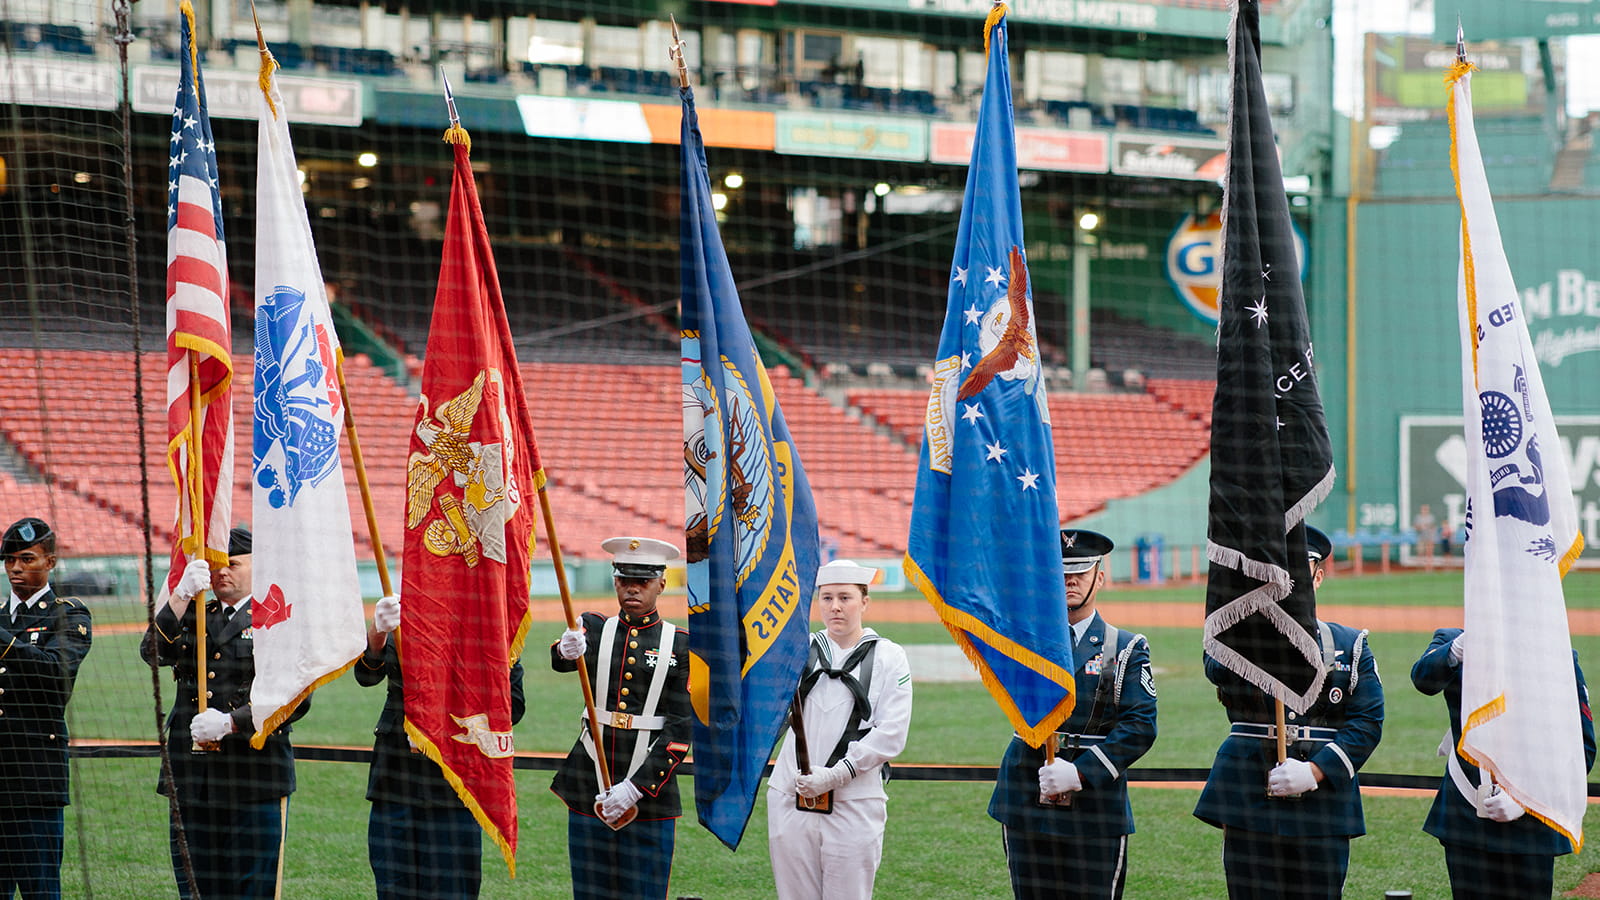 Raytheon Technologies was the presenting sponsor of the 2021 Run to Home Base. The Color Guard in this photo was part of the event’s opening ceremony at Fenway Park, Boston. The money raised through Run to Home Base will fund free care for all veterans and their families who are dealing with the “invisible wounds of war.” (Photo: Courtney Ryan)